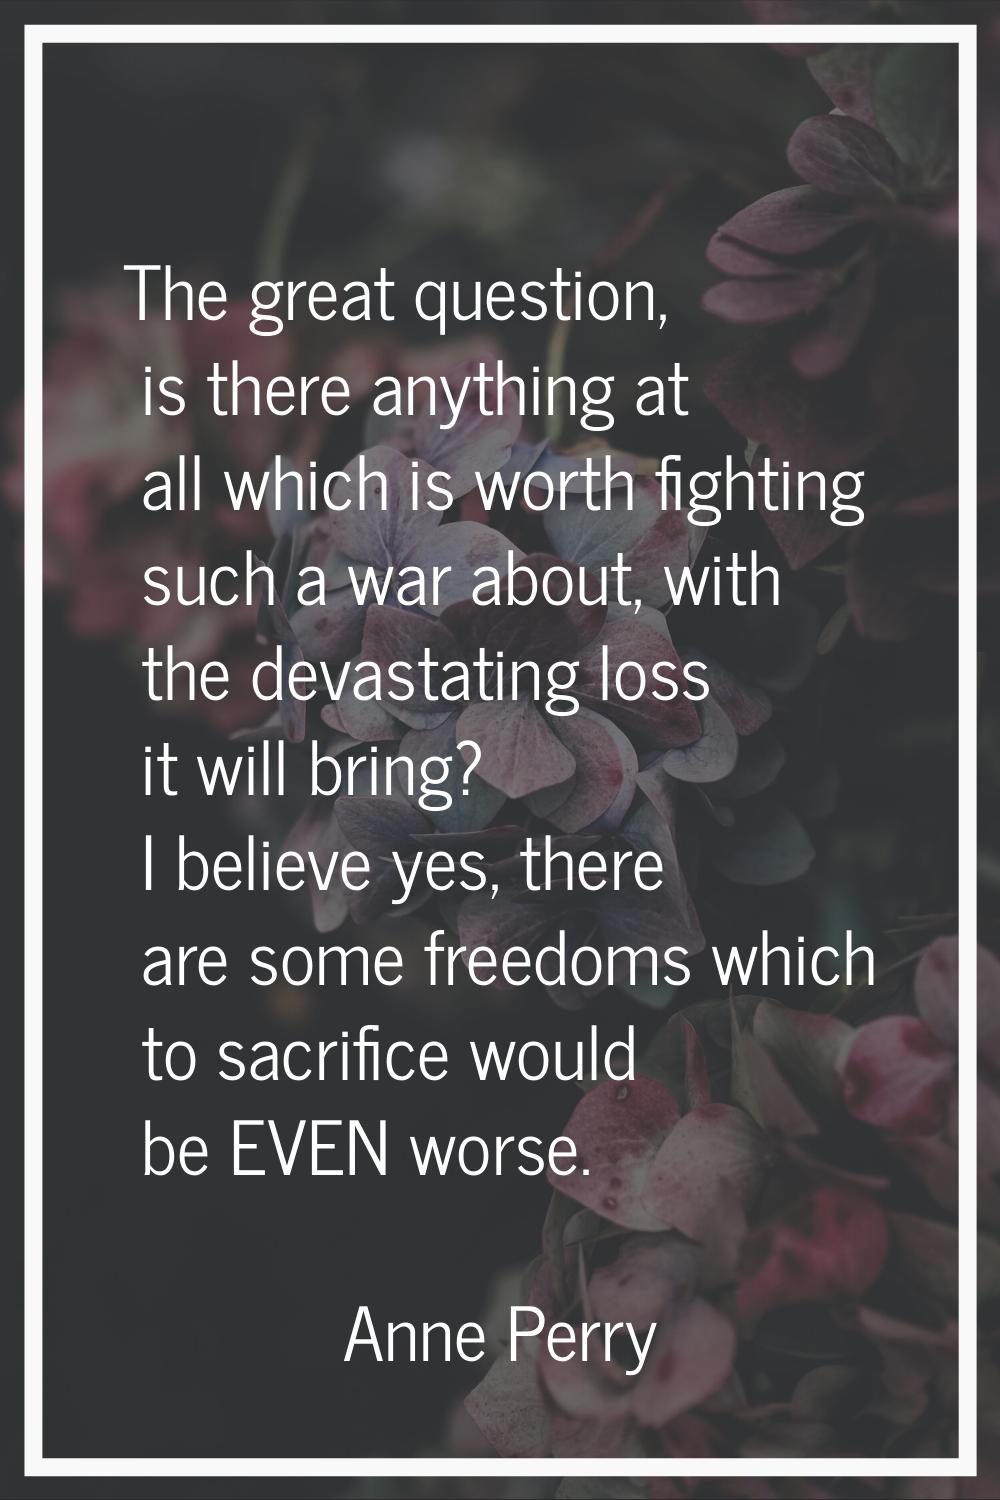 The great question, is there anything at all which is worth fighting such a war about, with the dev